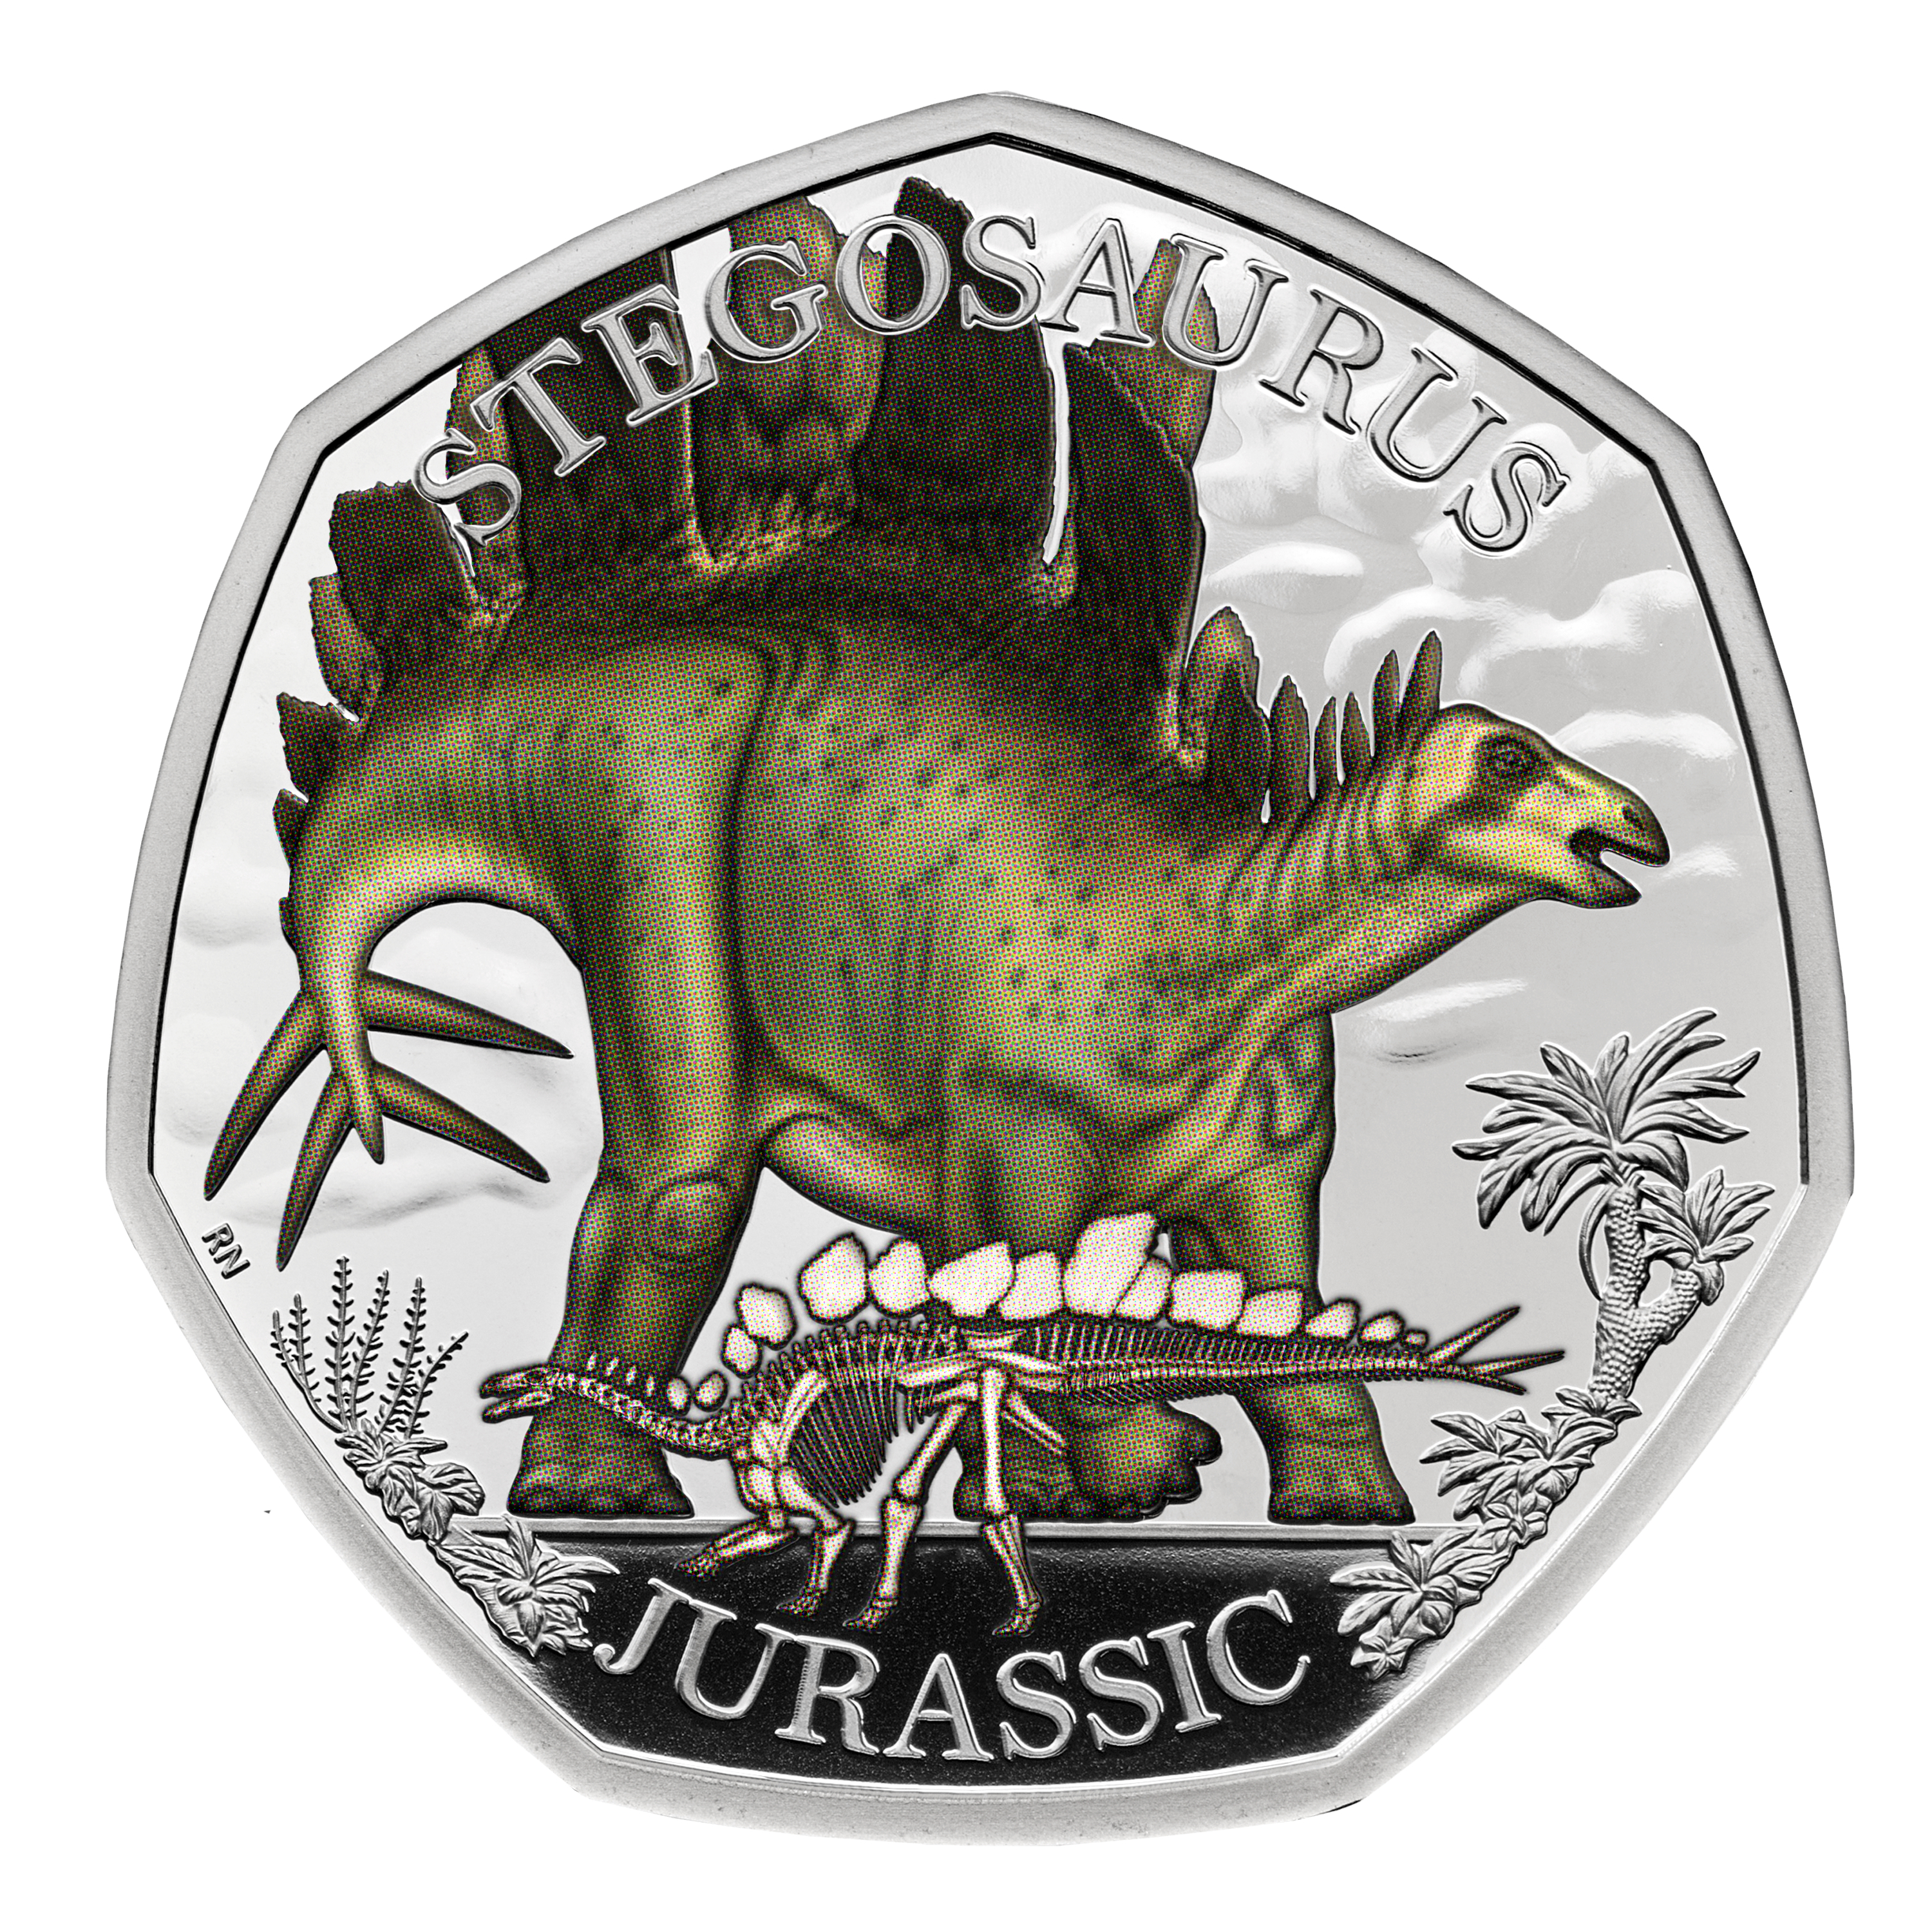 Dinosaur-themed collectable coins have been unveiled in collaboration with the Natural History Museum. 